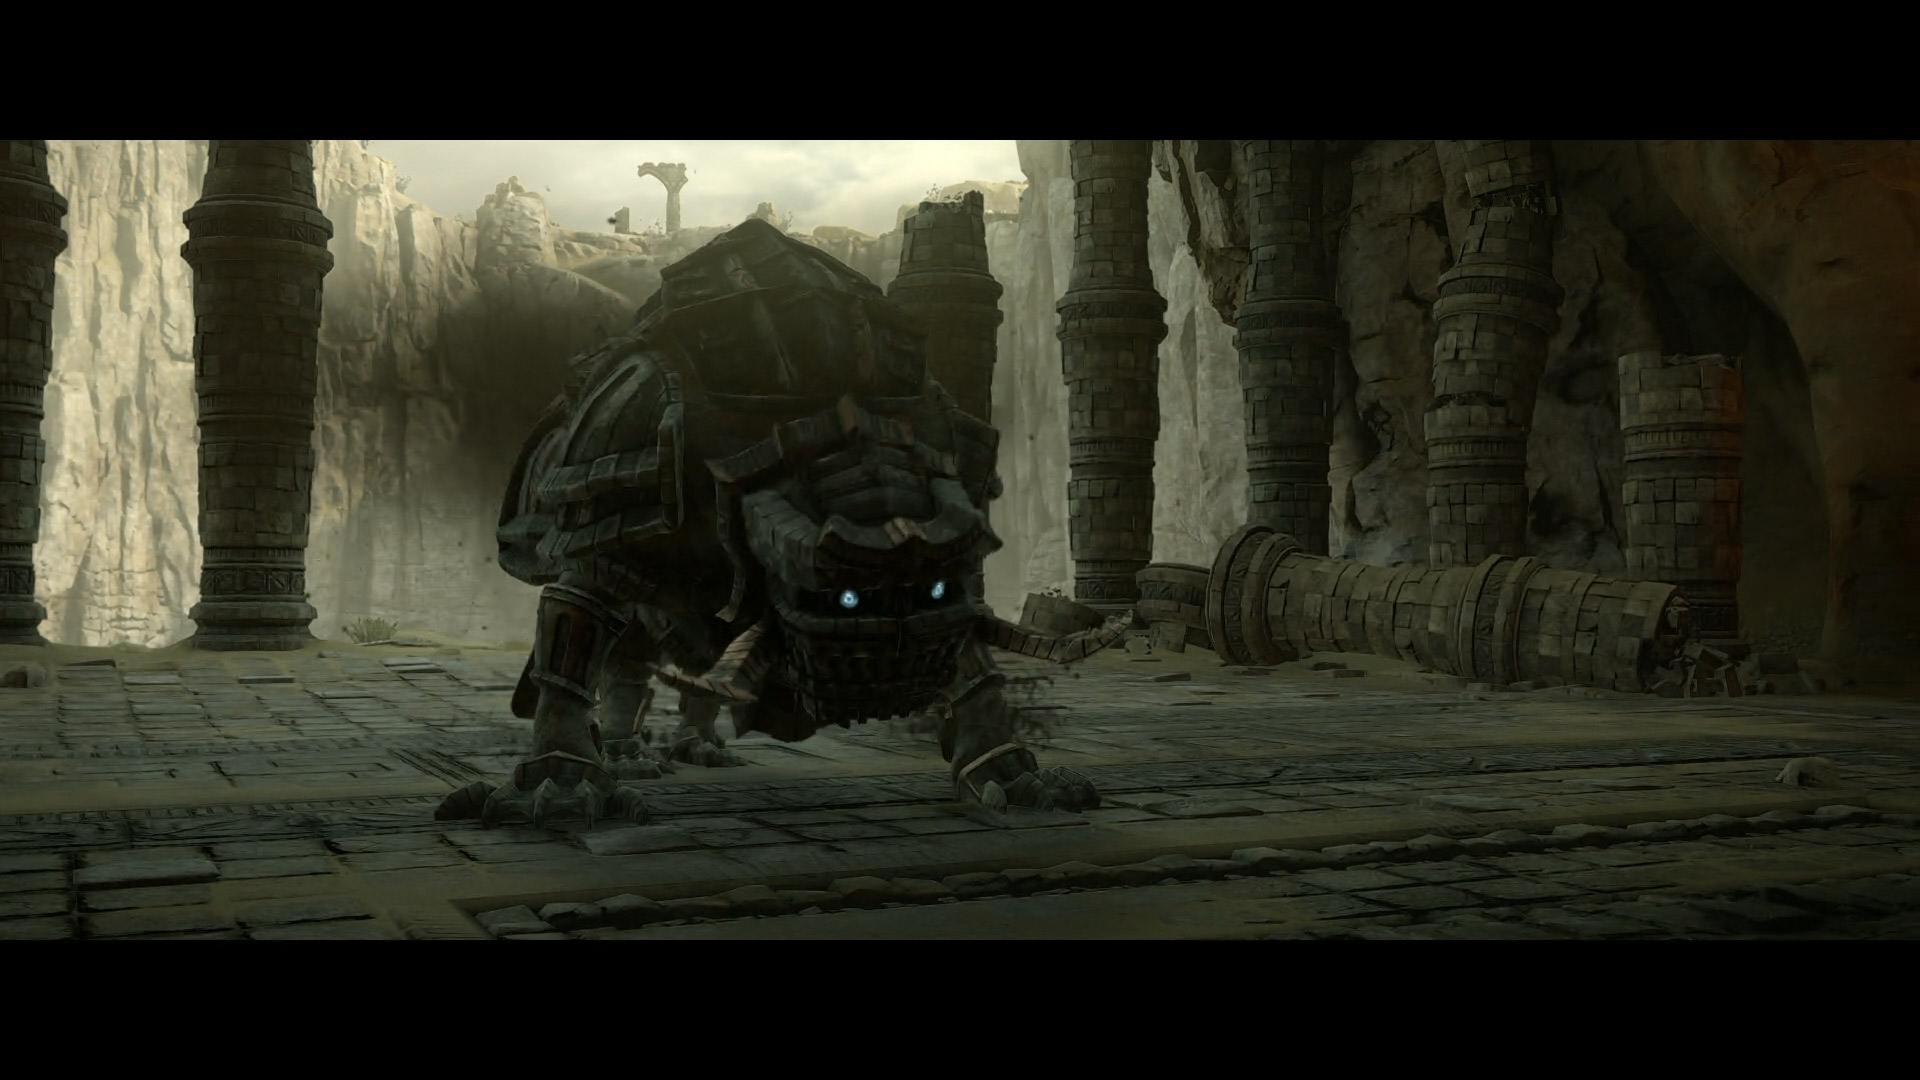 Ranking 10 of the Best Collossi in Shadow of the Colossus